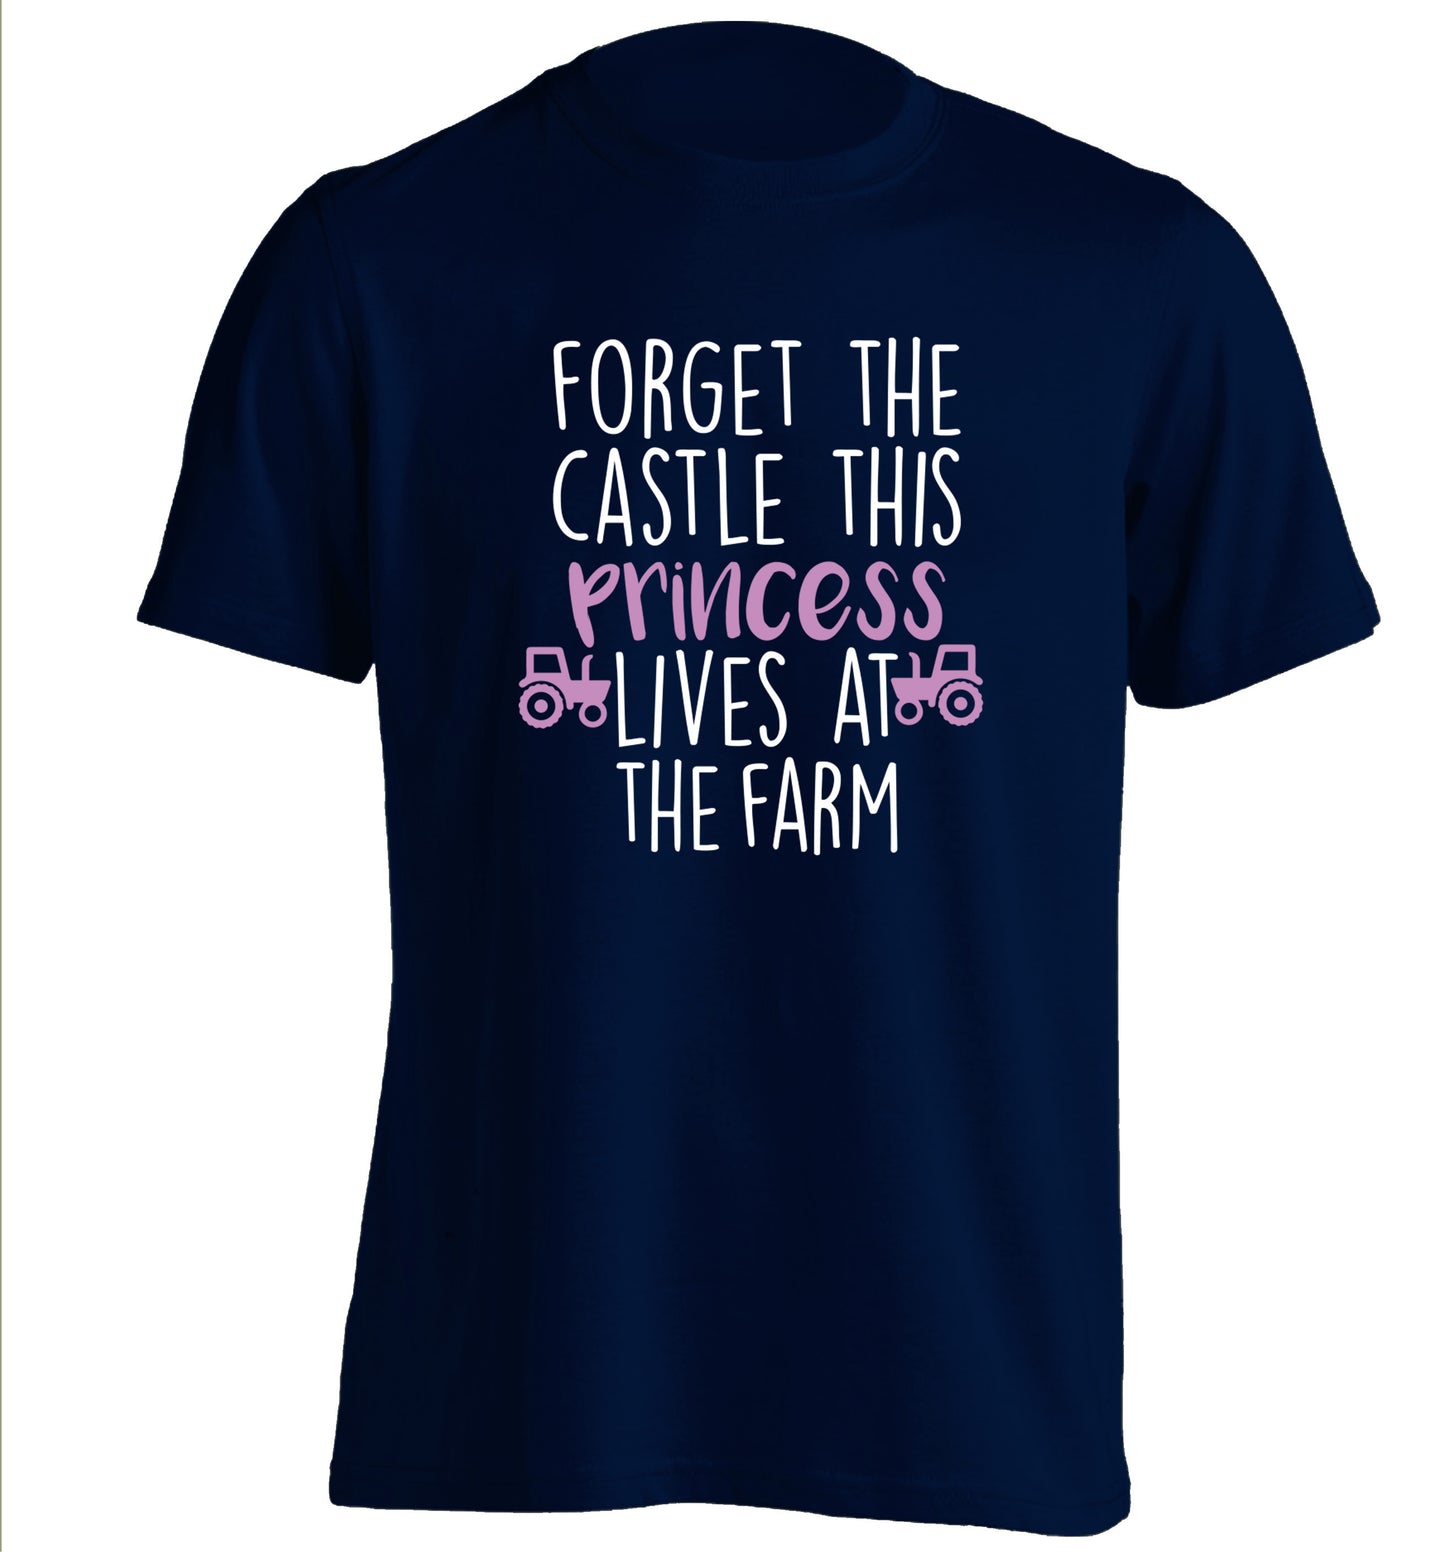 Forget the castle this princess lives at the farm adults unisex navy Tshirt 2XL